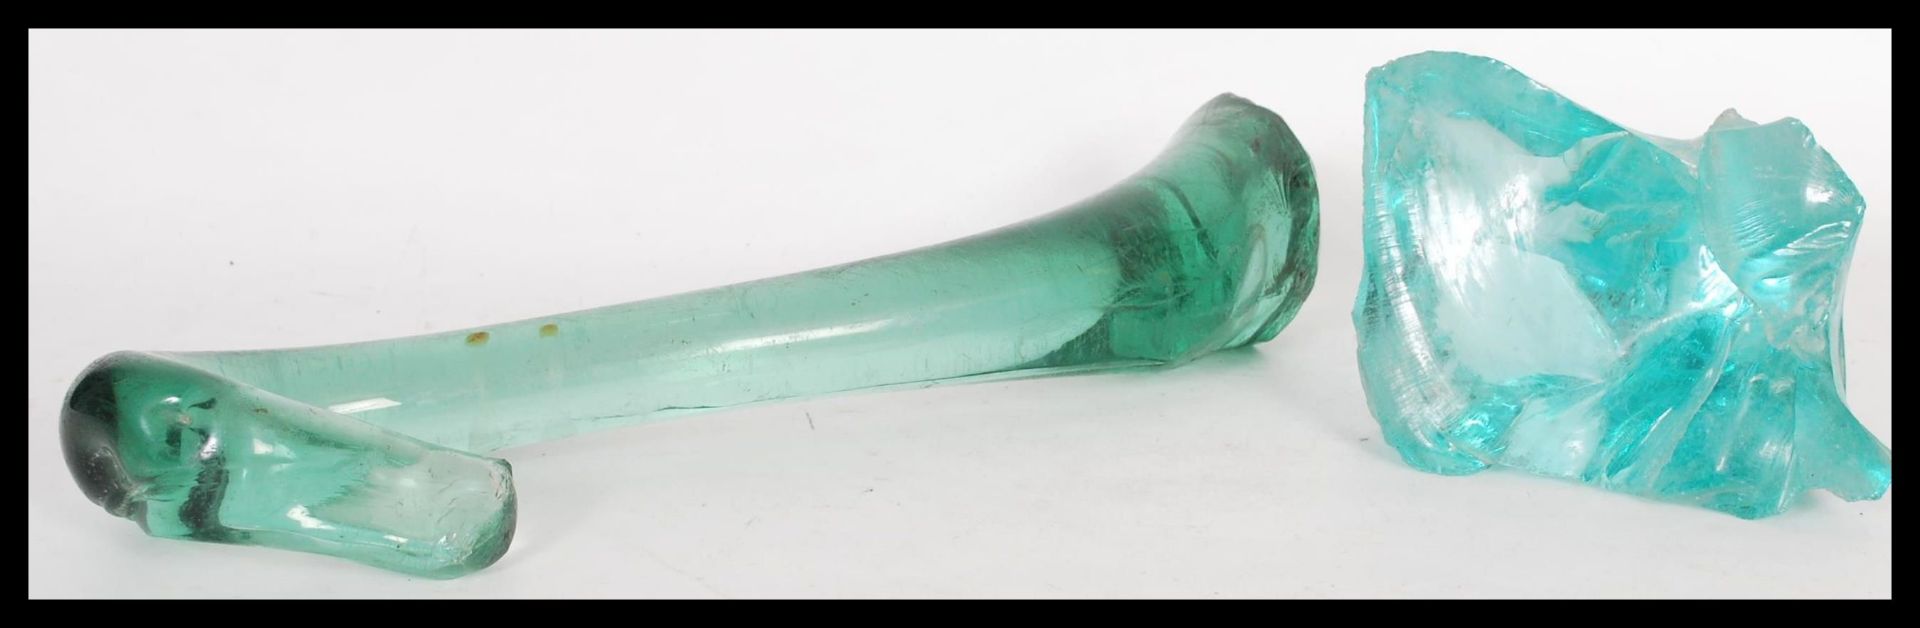 A large 19th Century Victorian Nailsea glass slump door stop paperweight. The large attractive green